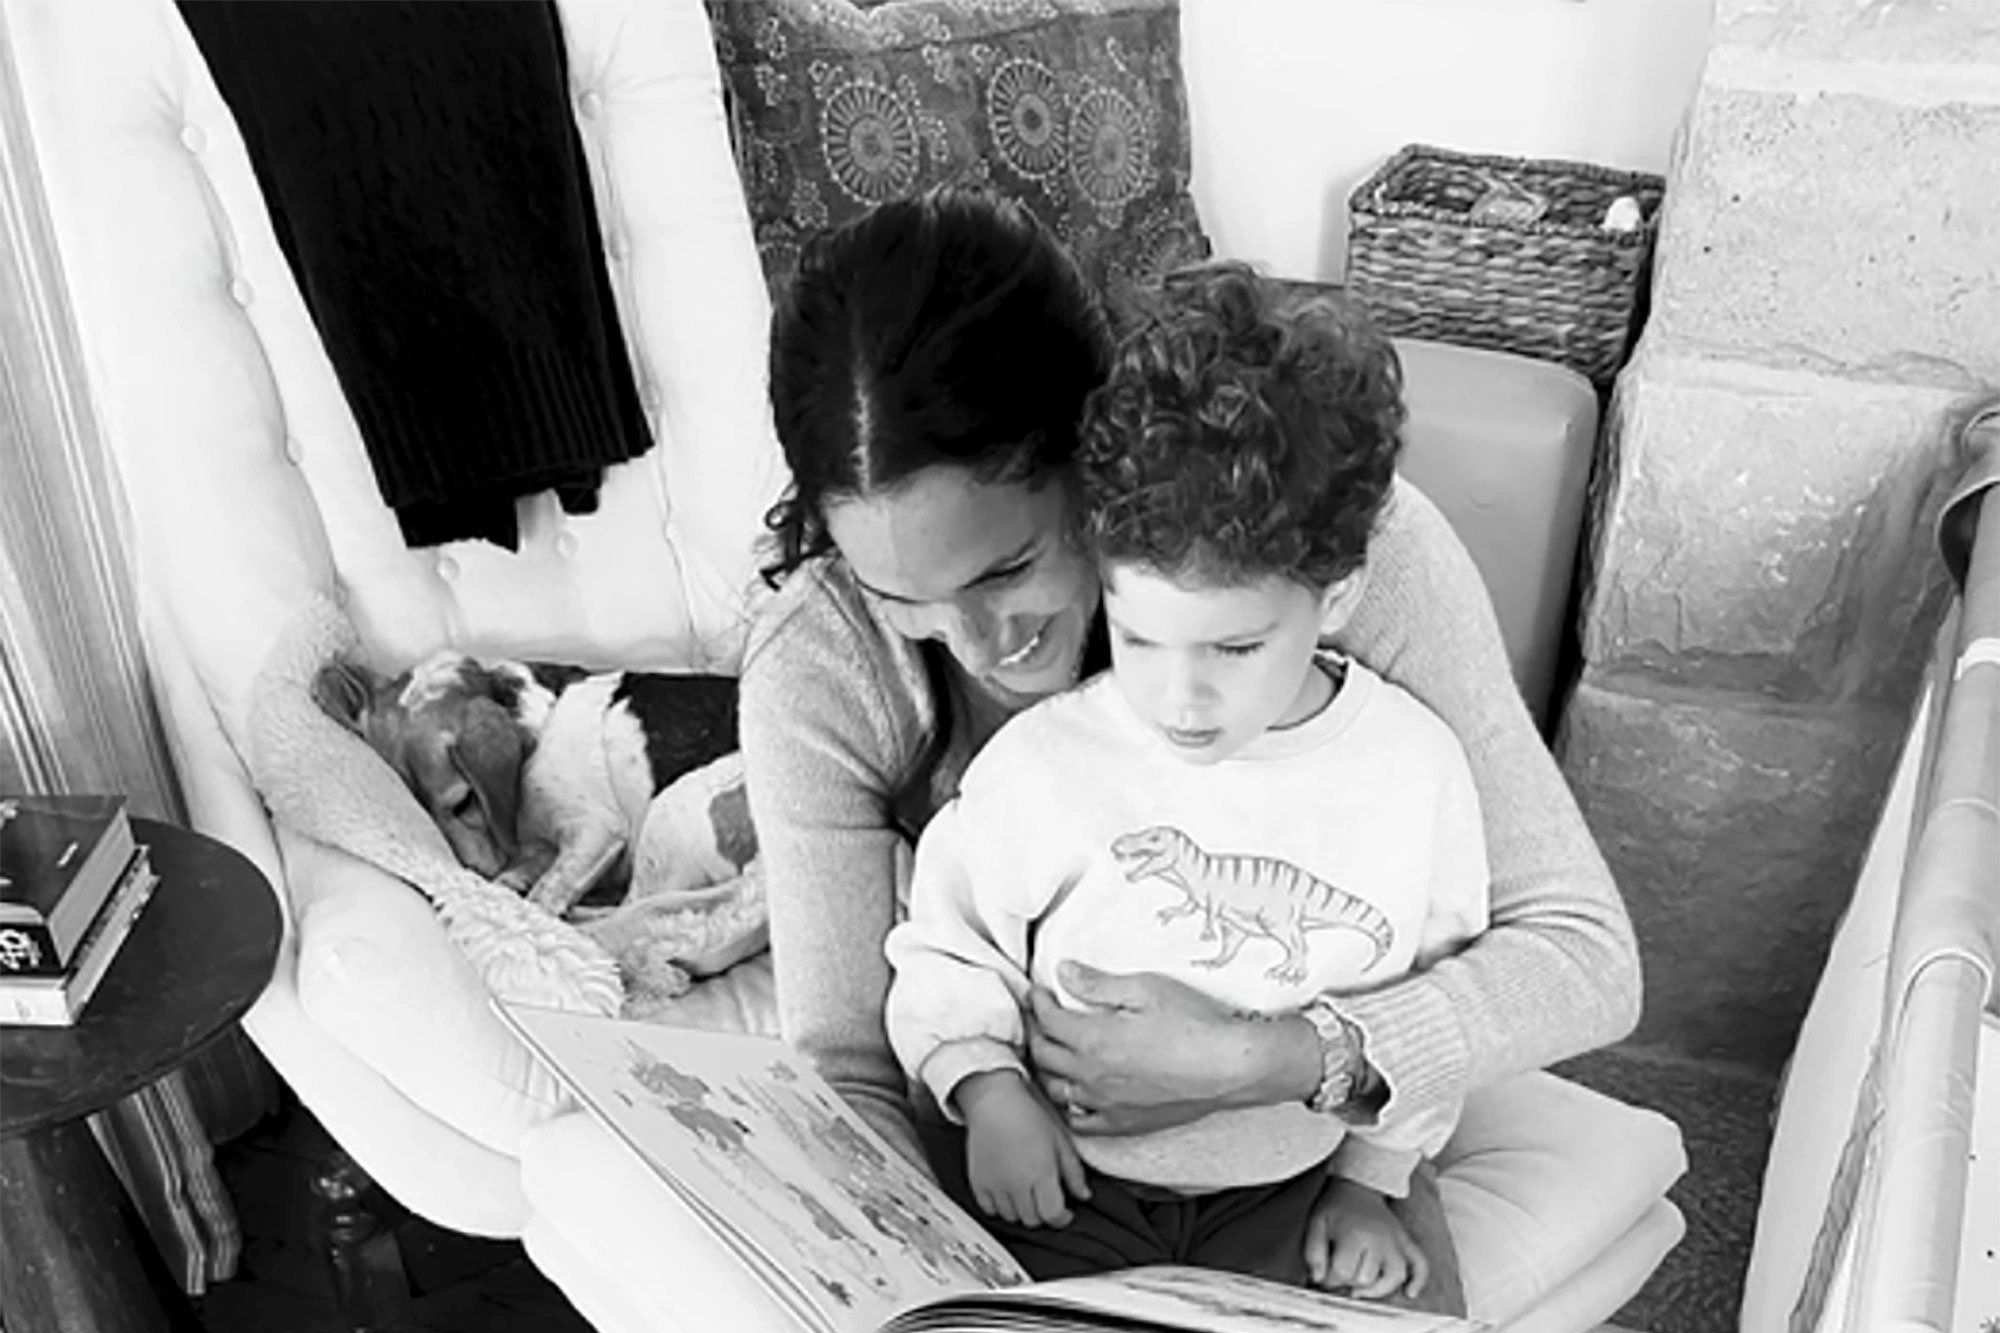 Pic: Prince Harry, Meghan Markle show off never-before-seen images of Archie, Lilibet